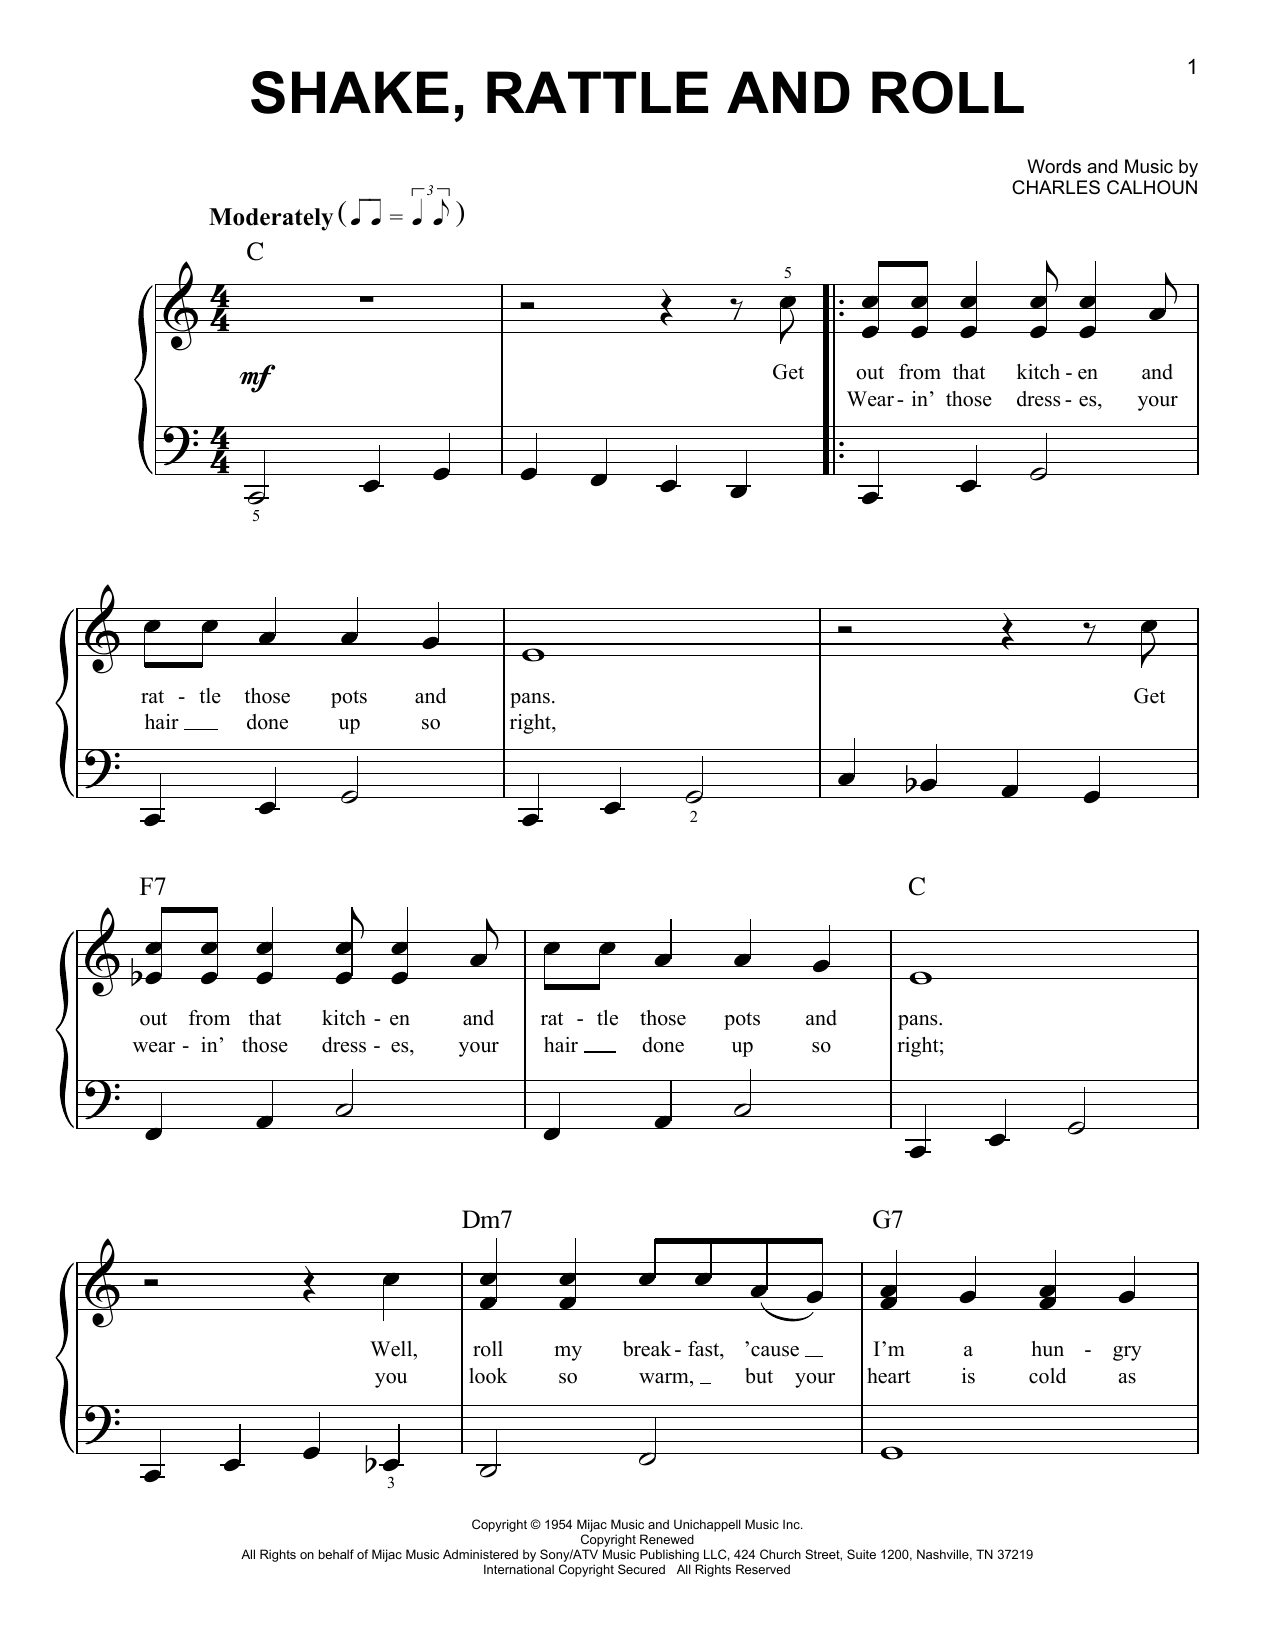 Bill Haley Shake, Rattle And Roll sheet music notes and chords. Download Printable PDF.